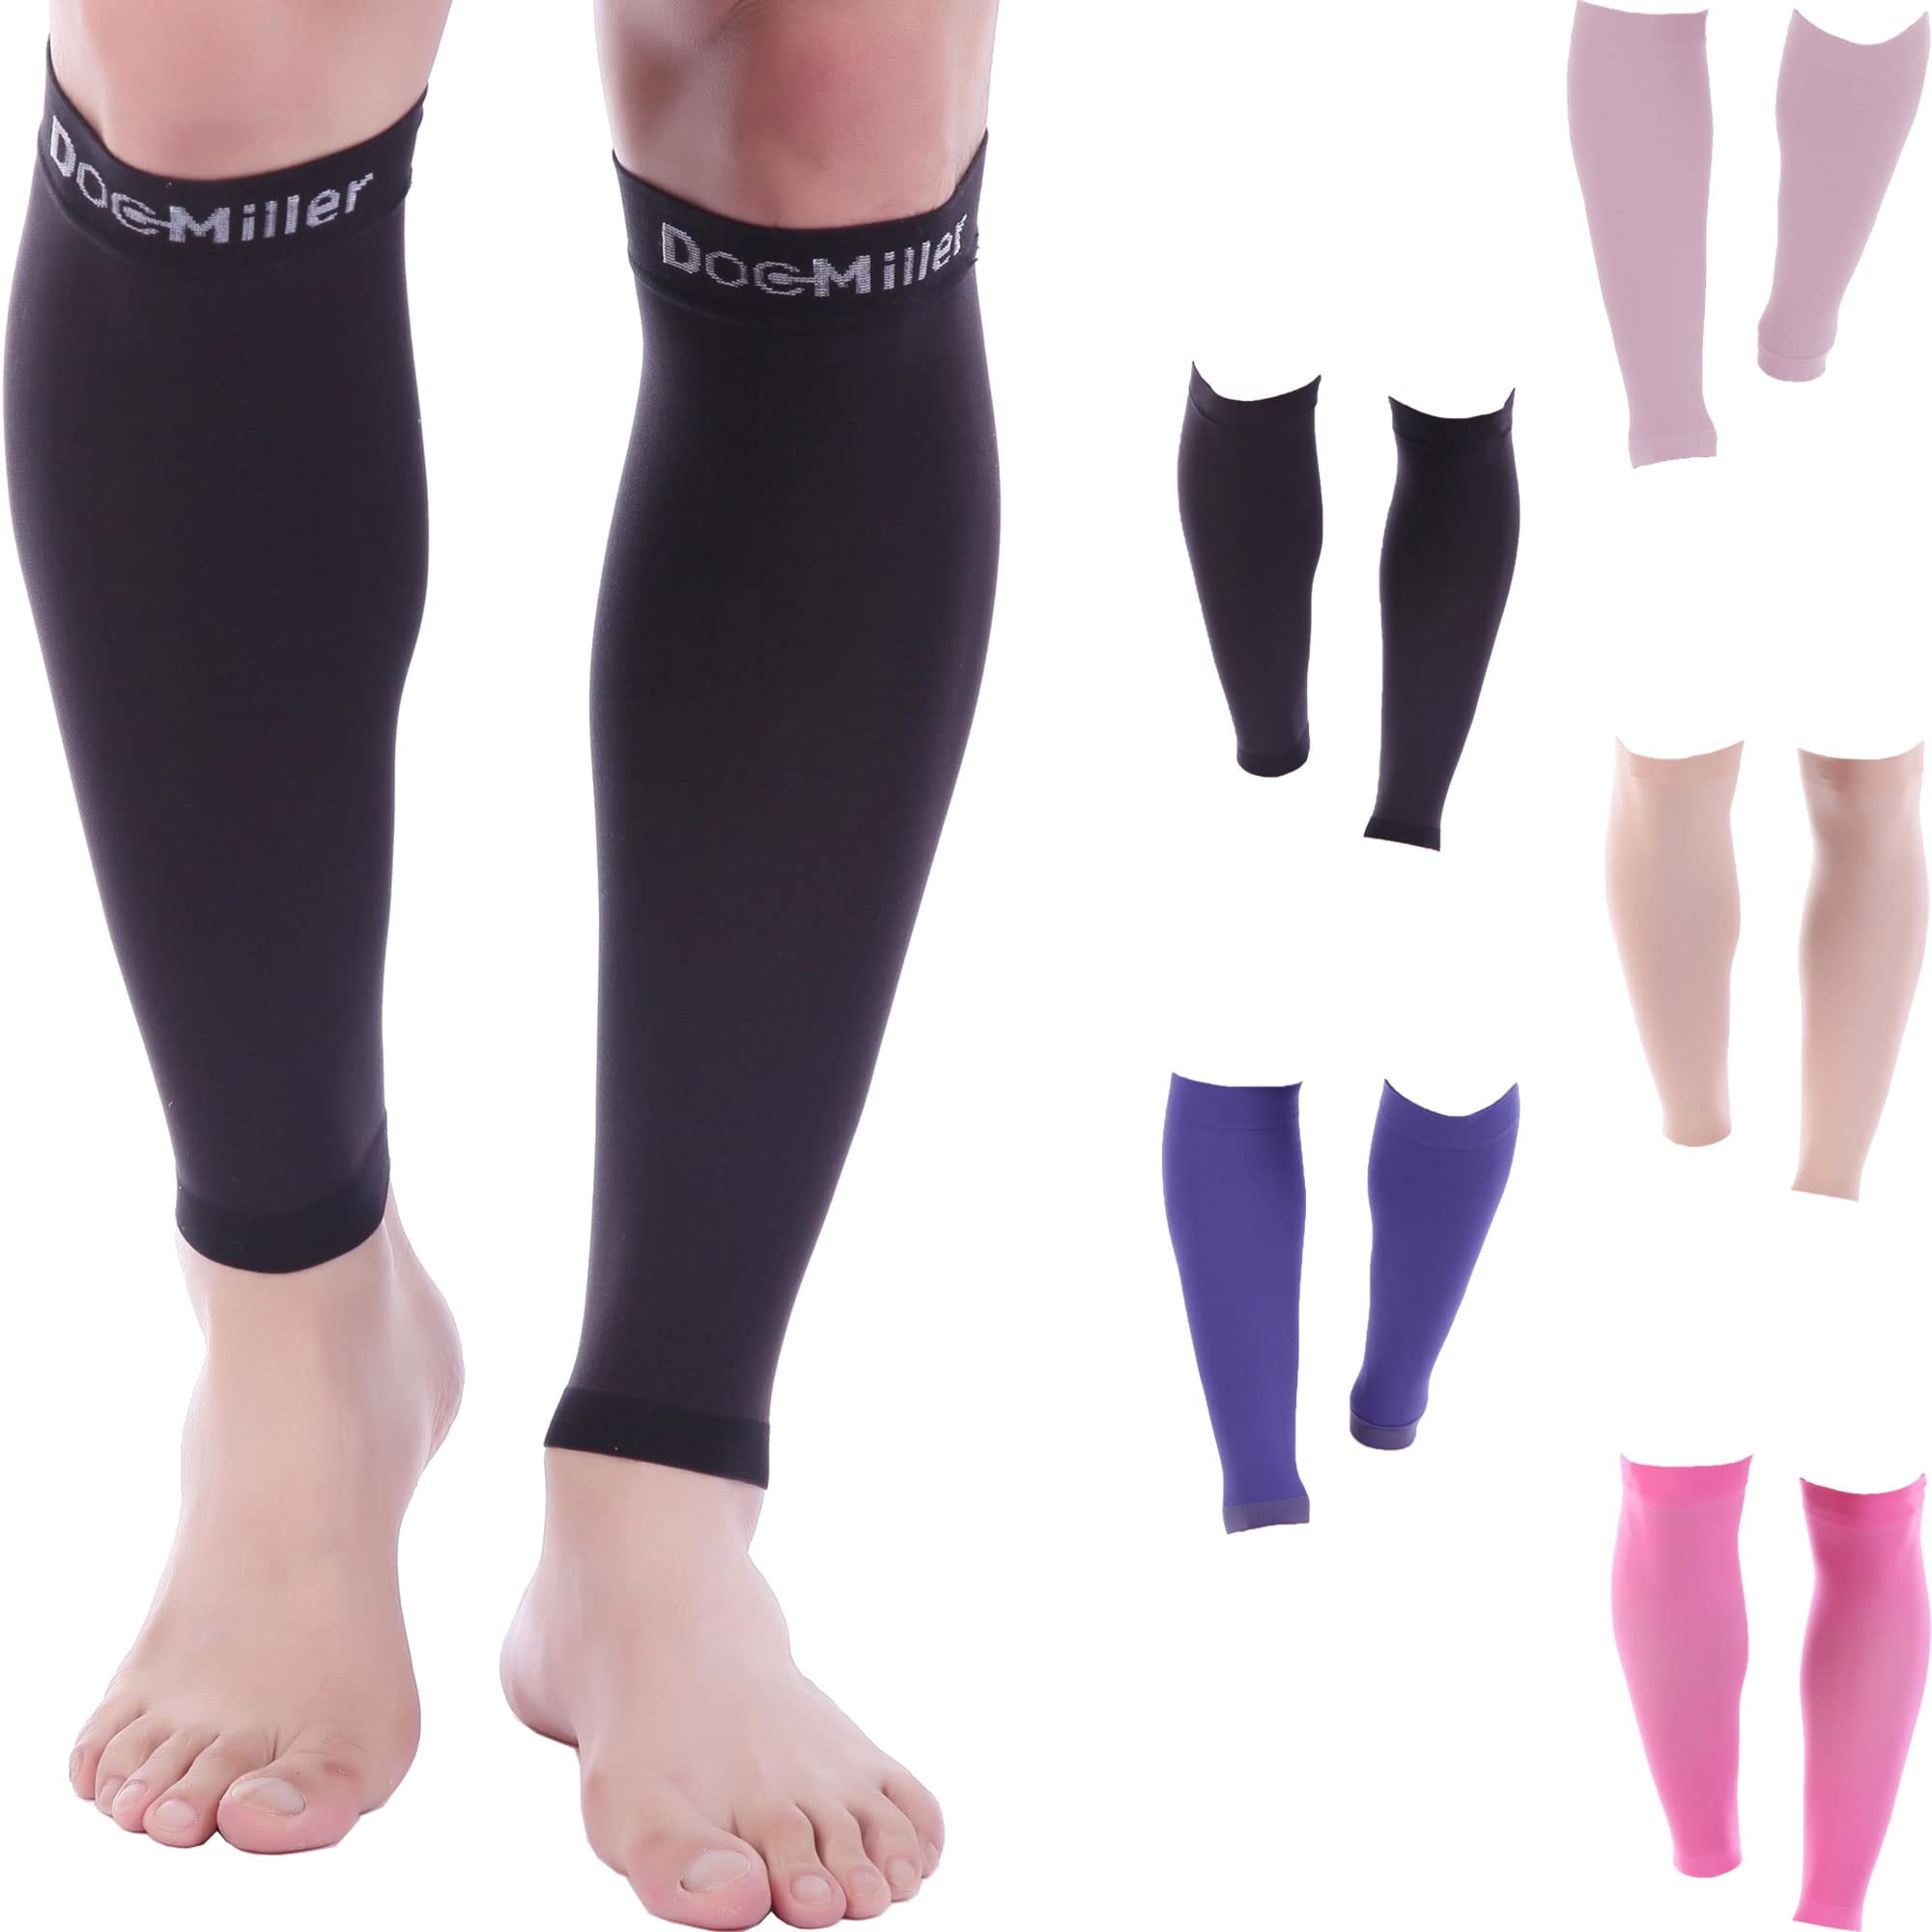 Compression Stockings Thigh High Medical Sleeve 30-40 mmHg Men